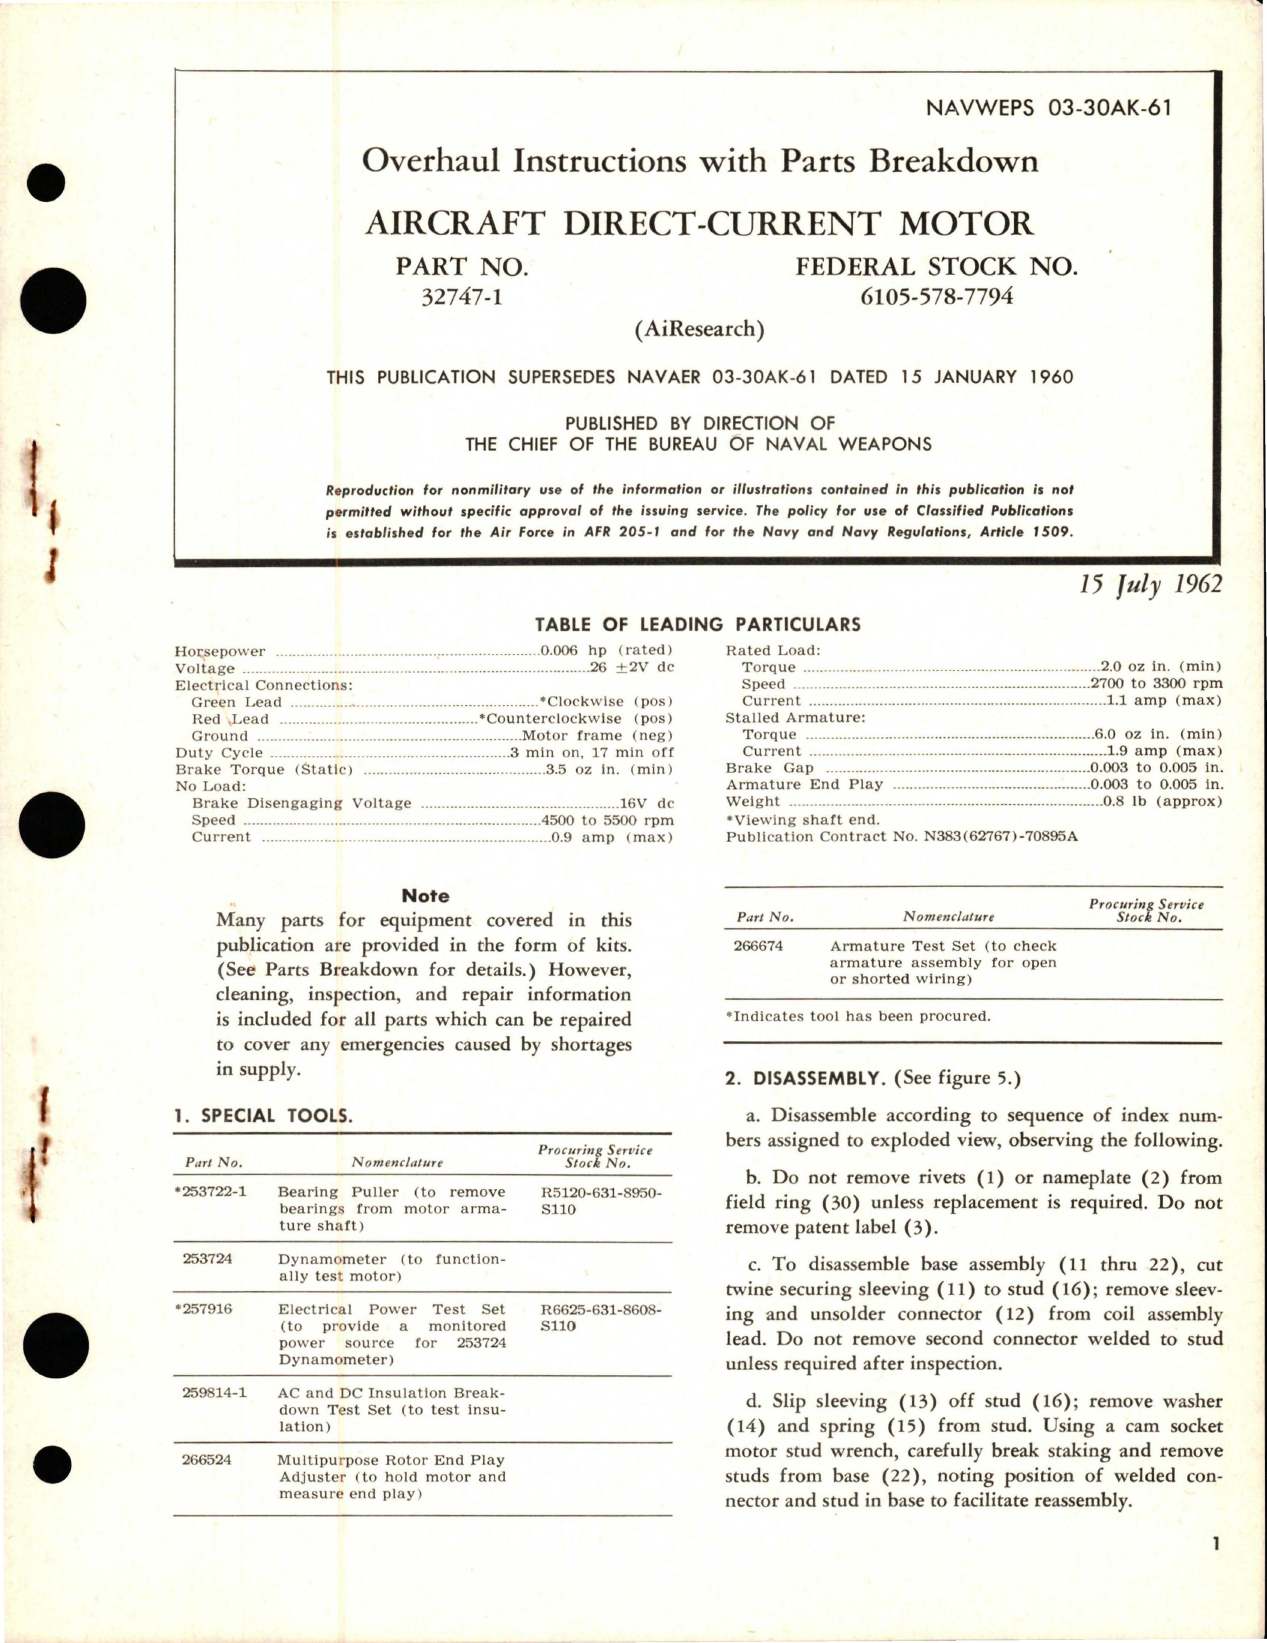 Sample page 1 from AirCorps Library document: Overhaul Instructions with Parts Breakdown for Direct-Current Motor - Part 32747-1 